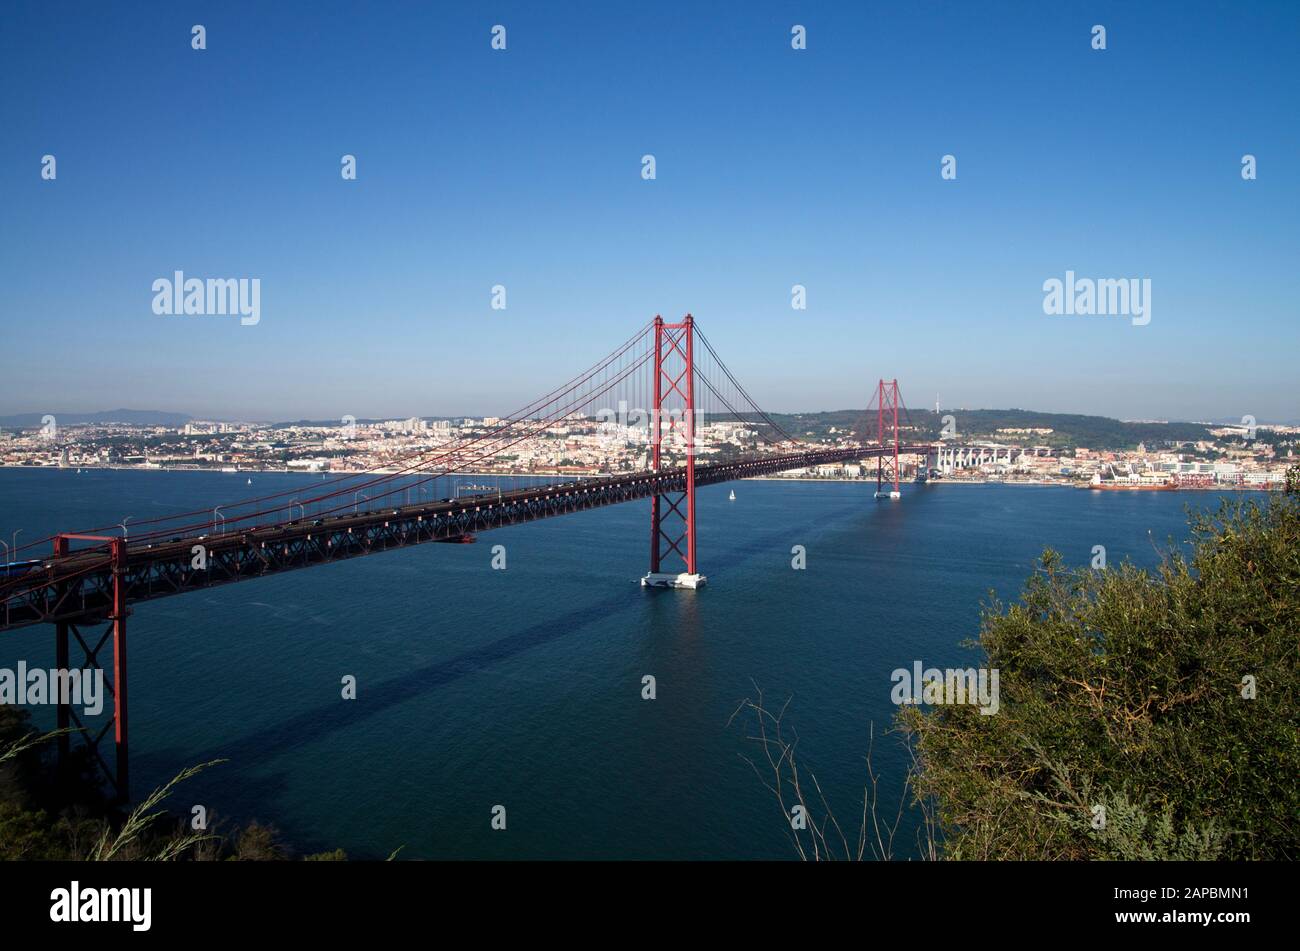 Lisbon 25th of April suspension bridge connecting to Almada over the Tagus River. View from above at the south bank with part of Lisbon city as backgr Stock Photo